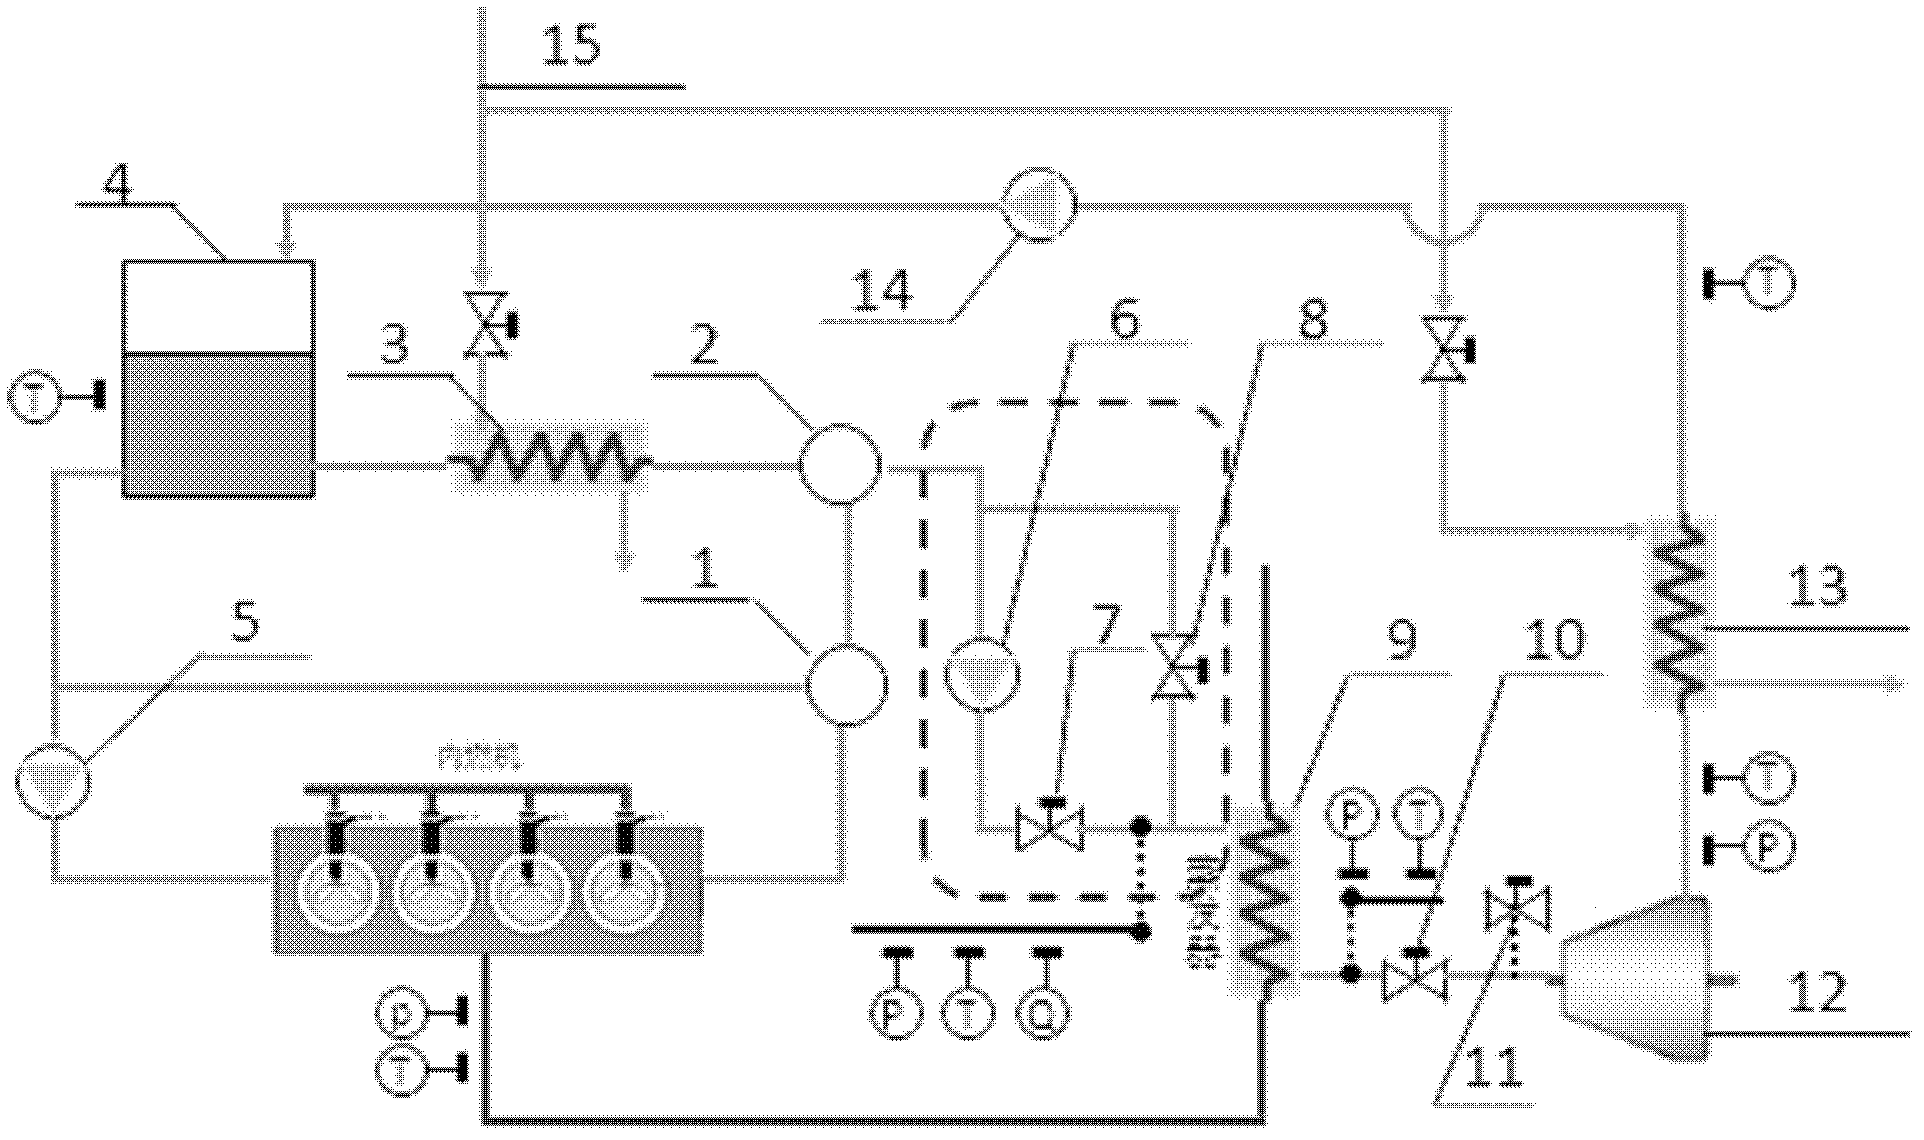 System for efficiently recovering waste heat energy from internal combustion engine